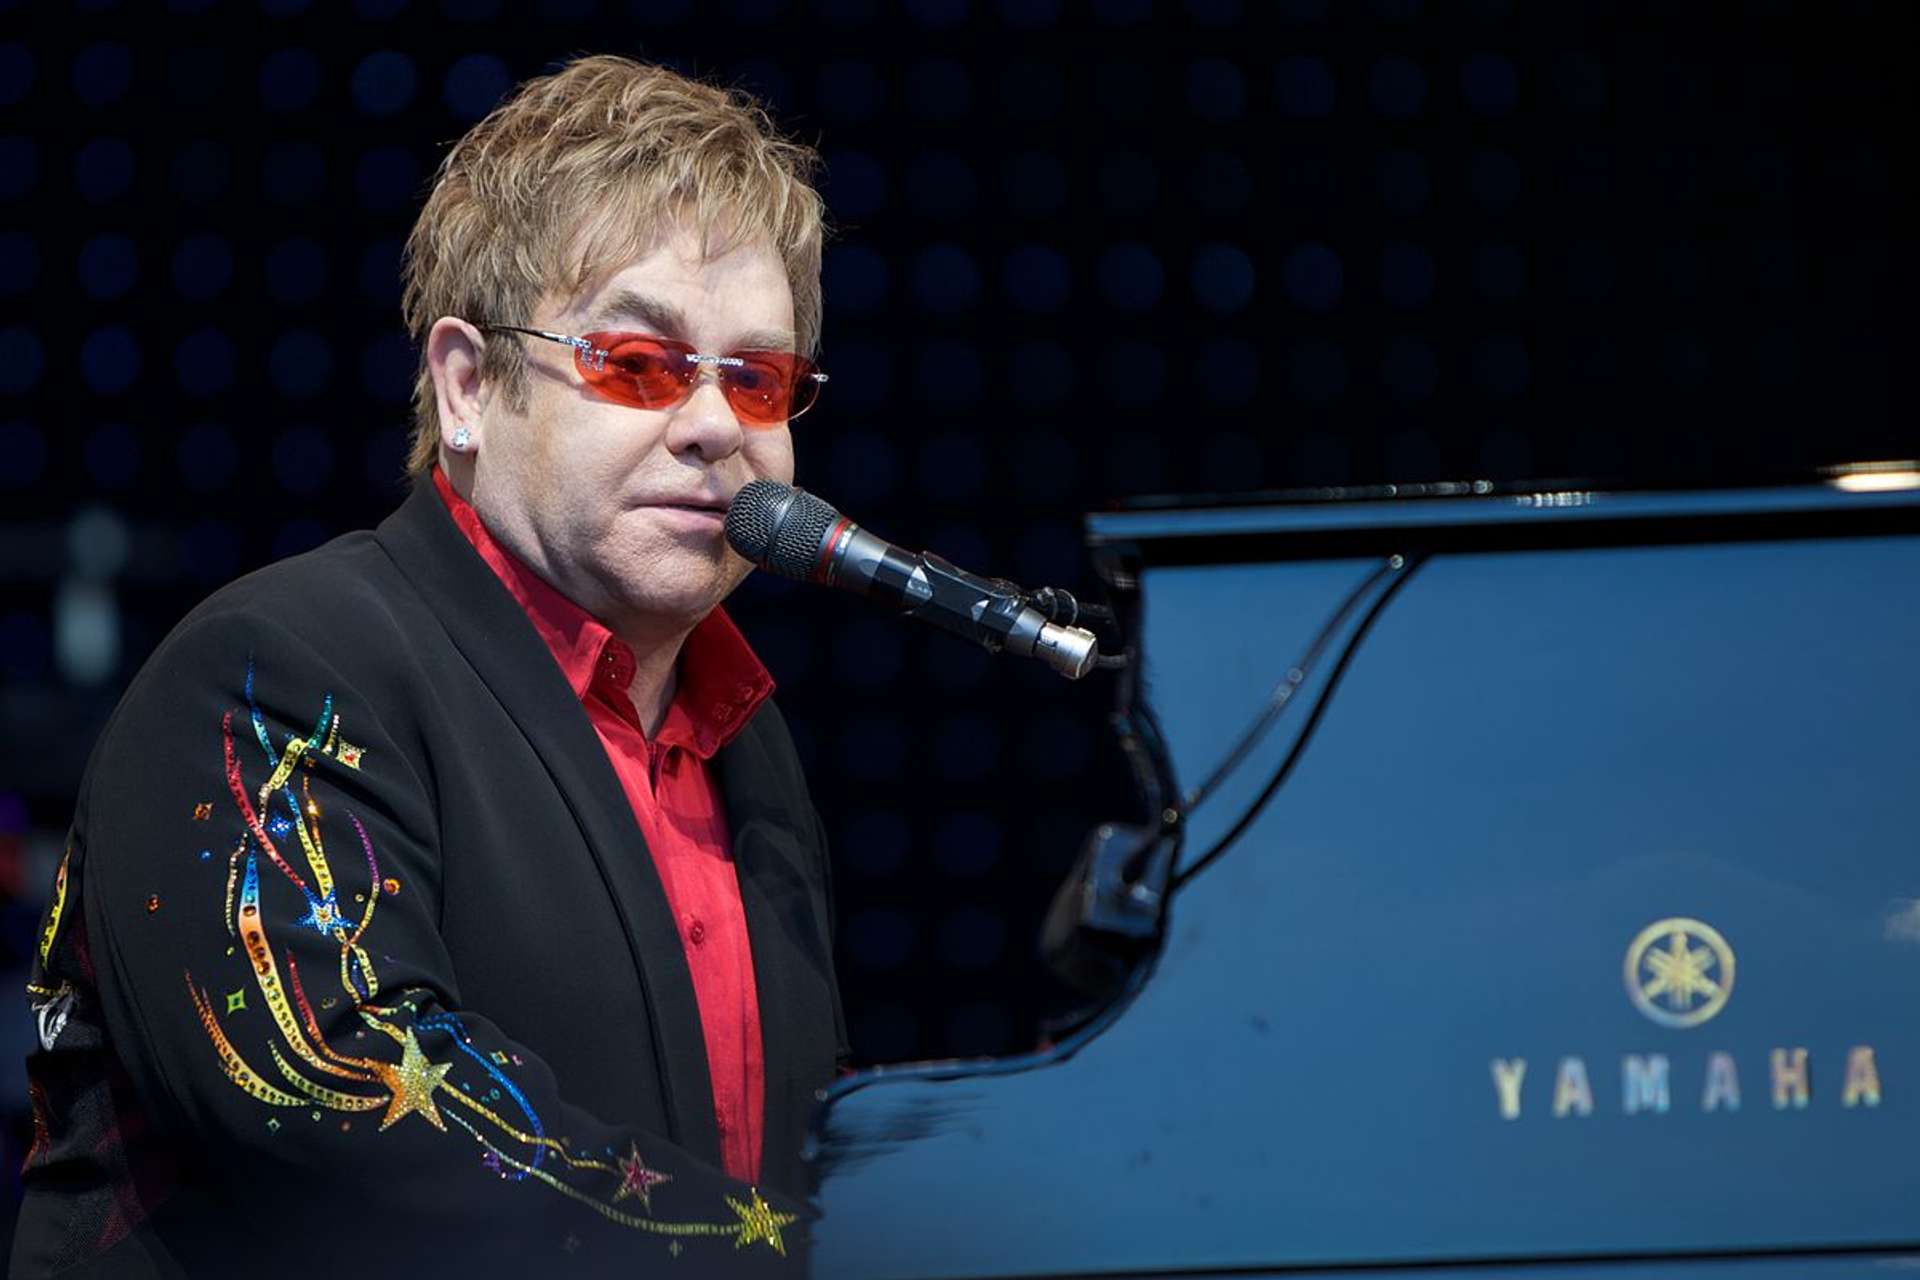 Sir Elton John performing in Norway, seated at a piano with a microphone.